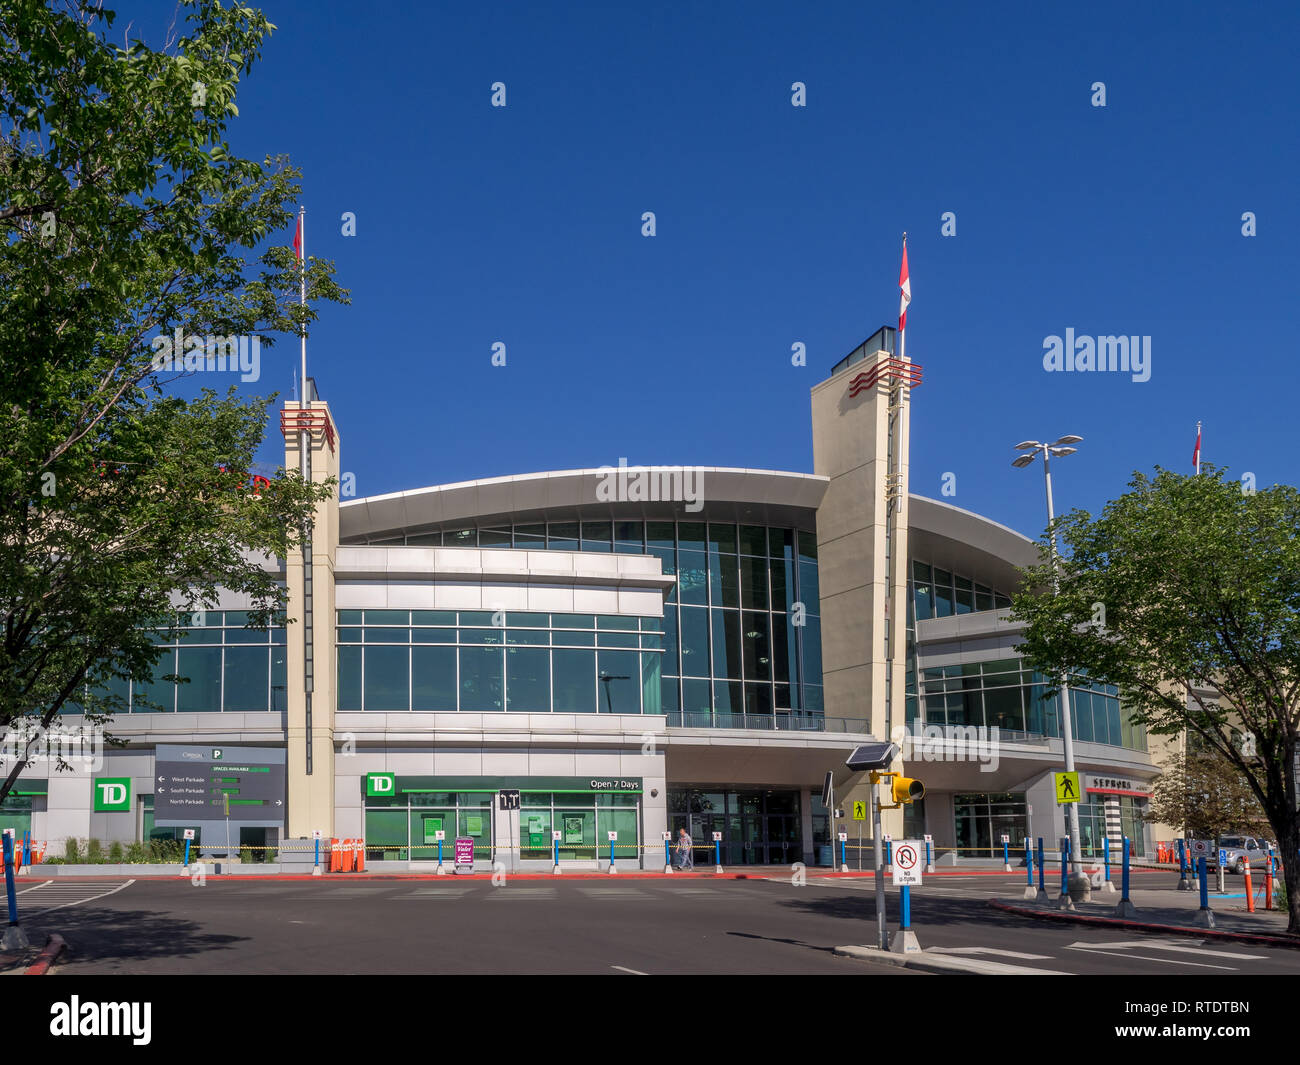 Entrance to Chinook Centre shopping mall on June 5, 2016 in Calgary, Alberta Canada. Chinook mall is one of the busiest malls in Alberta and Canada. Stock Photo